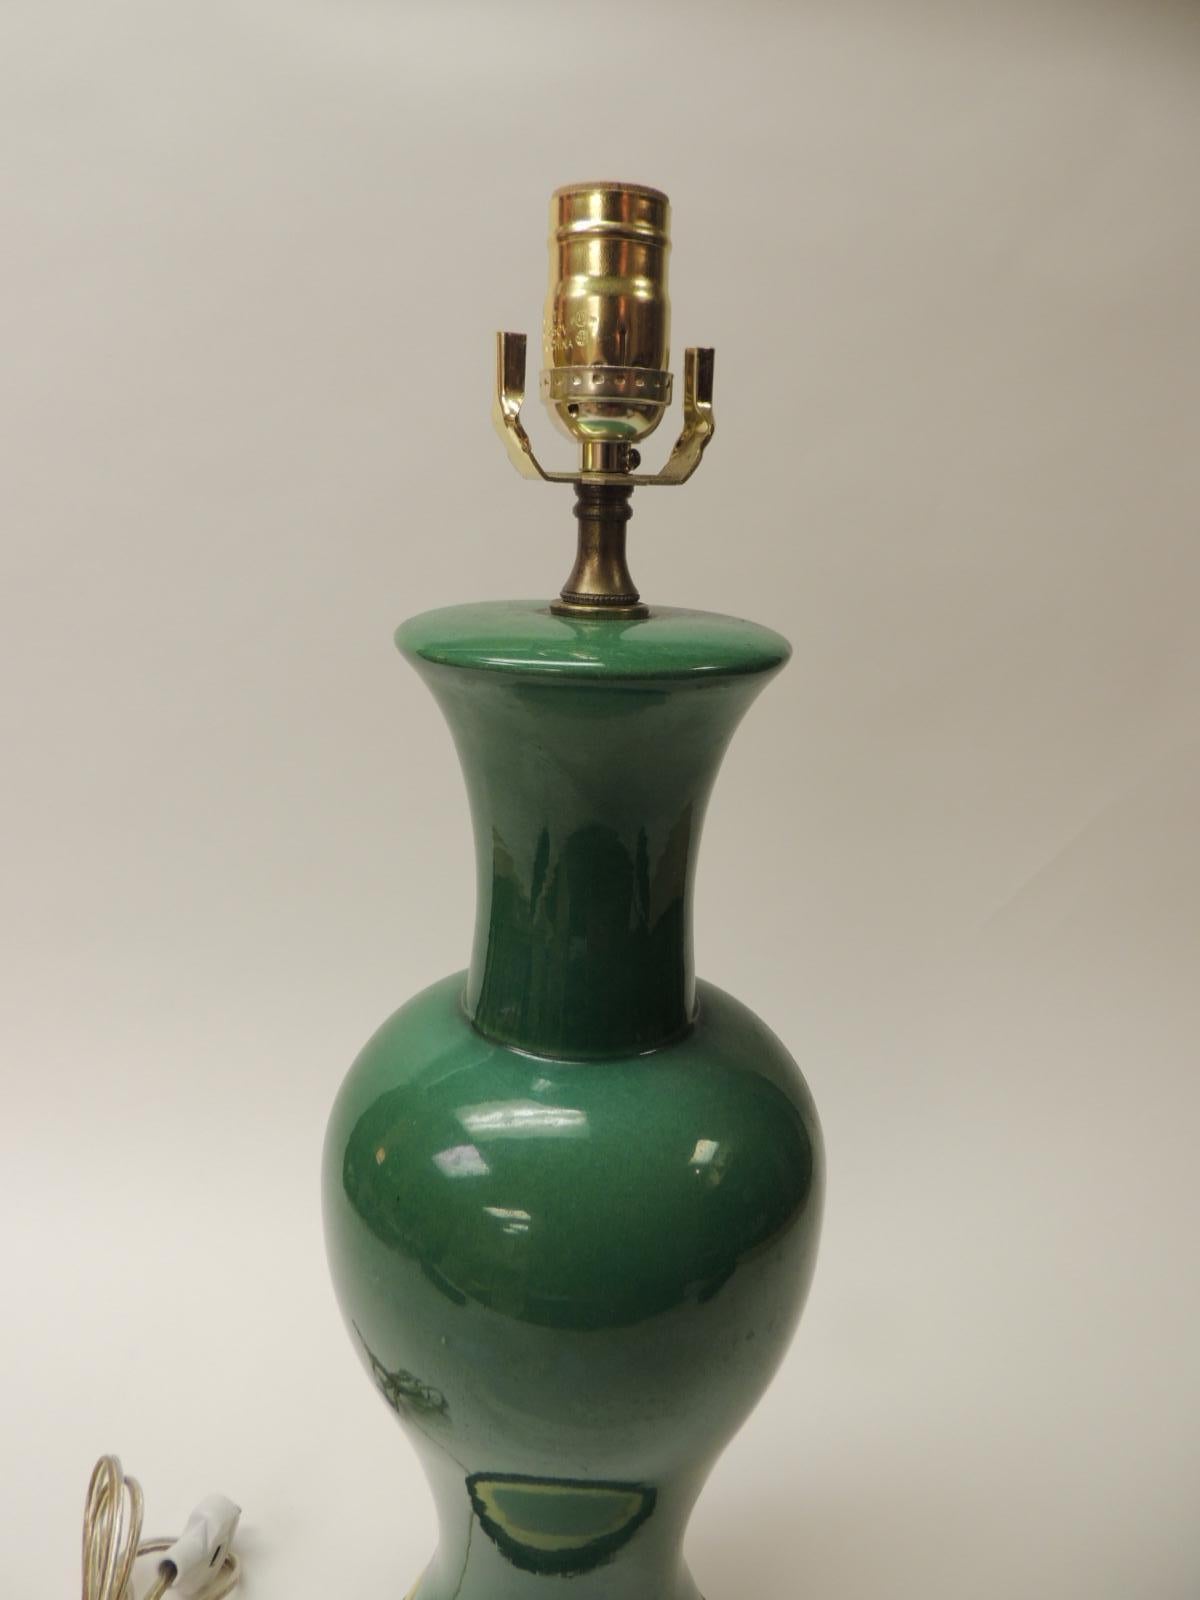 Vintage Green Ceramic Lamp with Brass Fittings (Asiatisch)